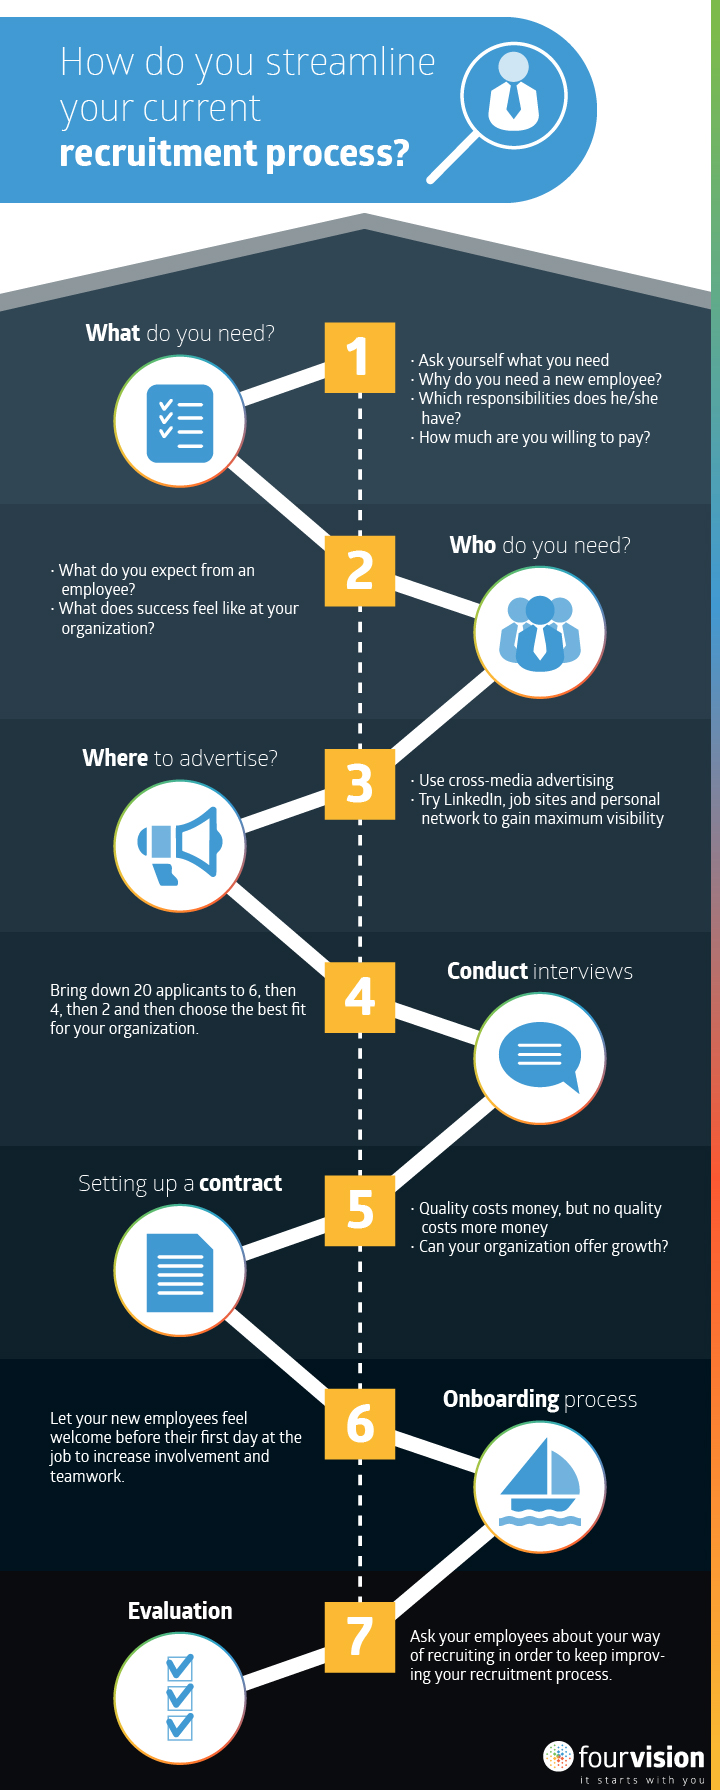 How to streamline recruitment process infographic FourVision